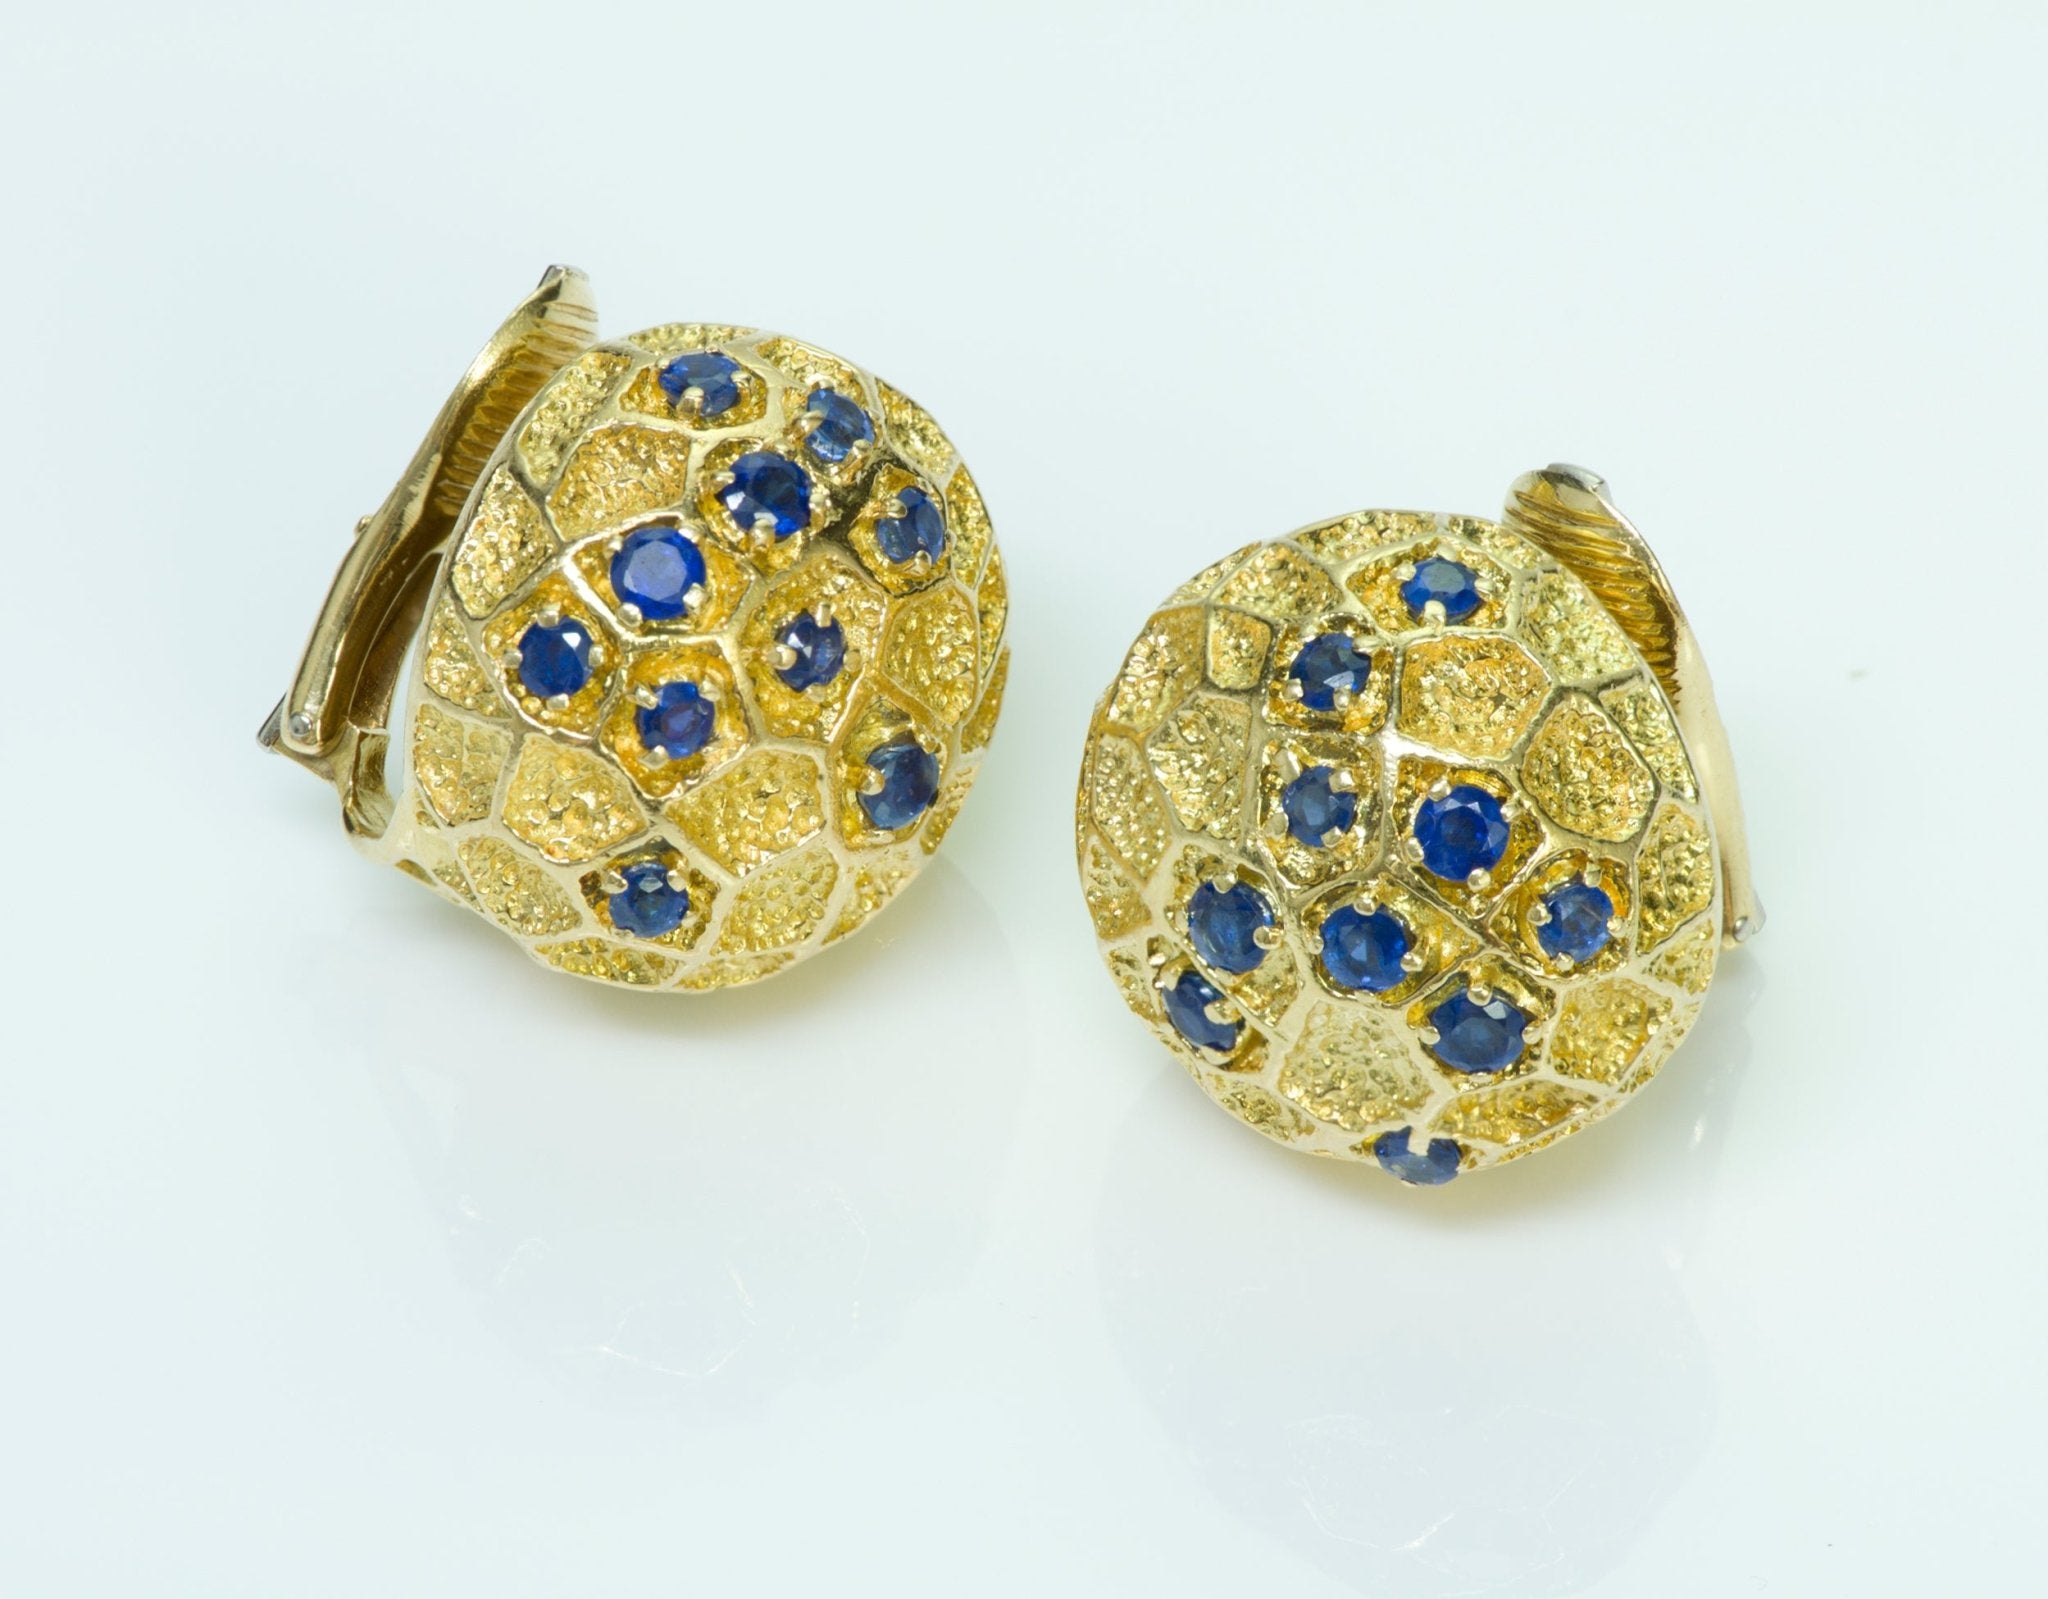 Cartier 18K Gold Sapphire Honeycomb Earrings - DSF Antique Jewelry